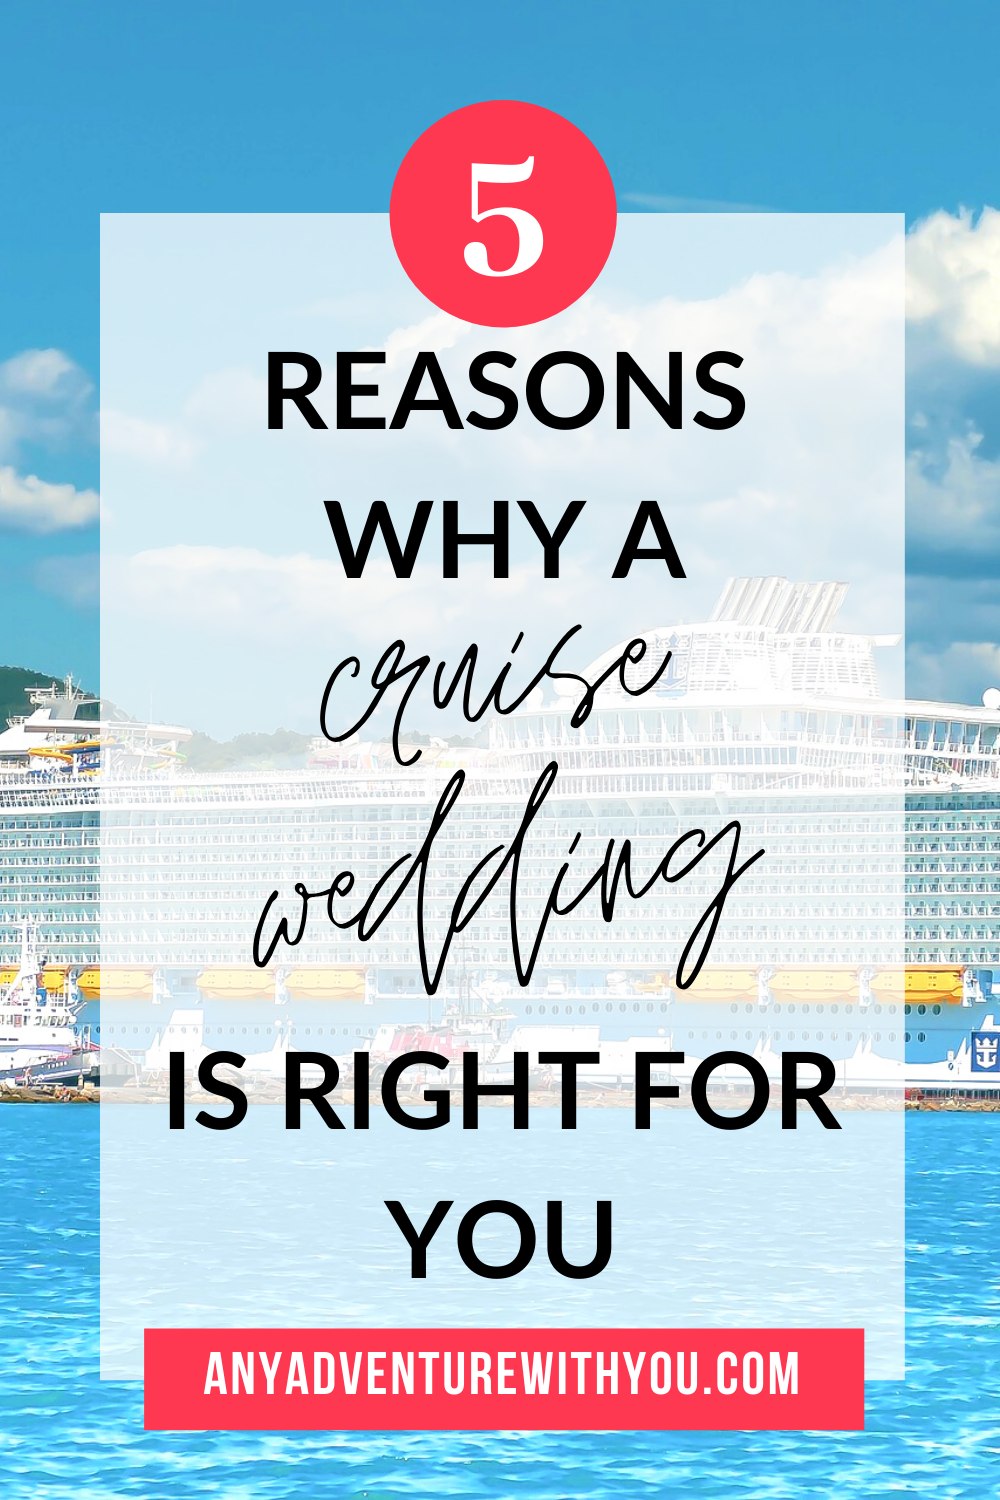 Getting married on a cruise can be a great option for couples looking for a destination wedding. Here are 5 reasons why a cruise wedding might be right for you! #Cruise #Wedding #WeddingPlanning #CruisePlanning #DestinationWedding